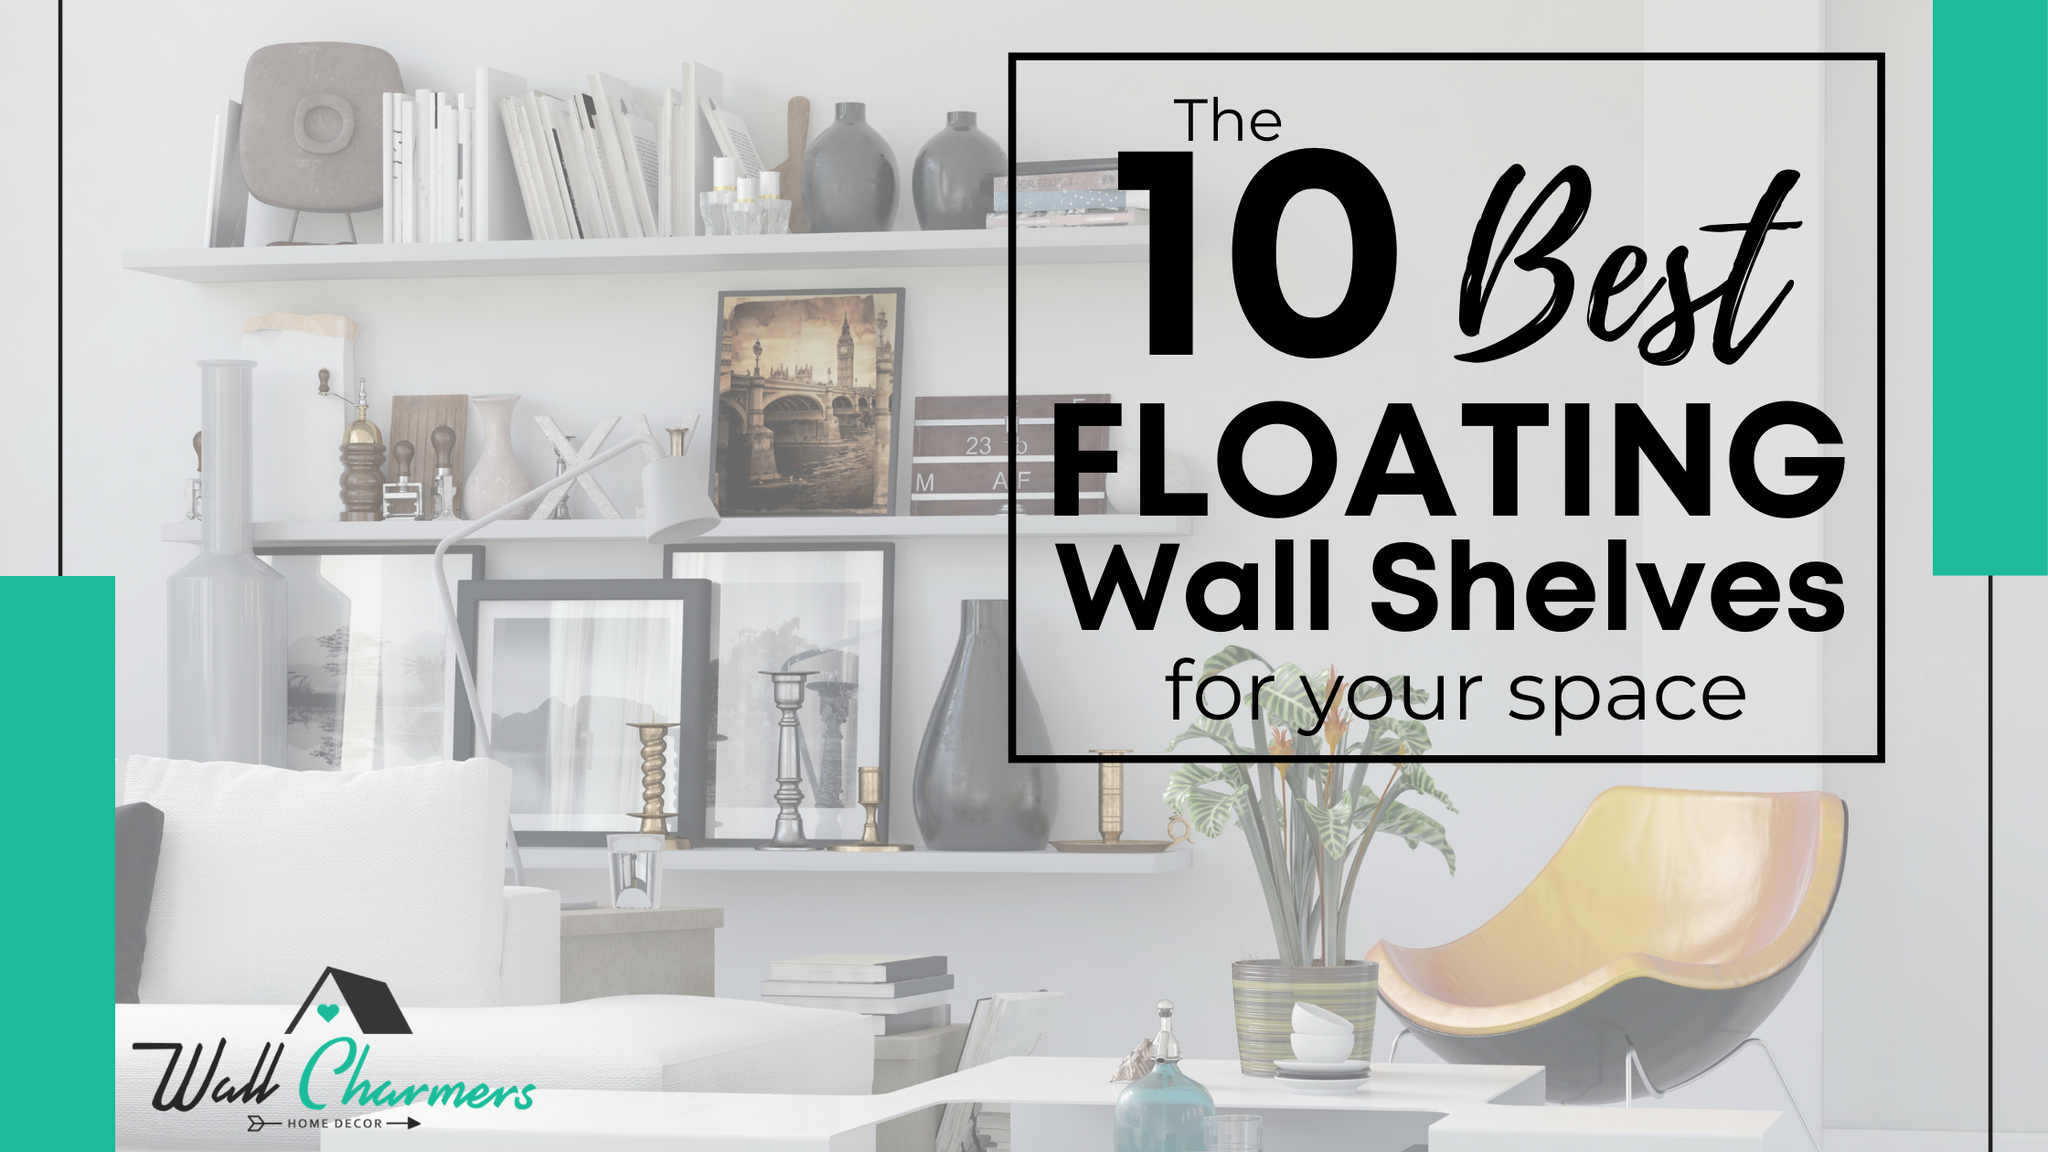 The 10 Best Floating Wall Shelves For Your Space